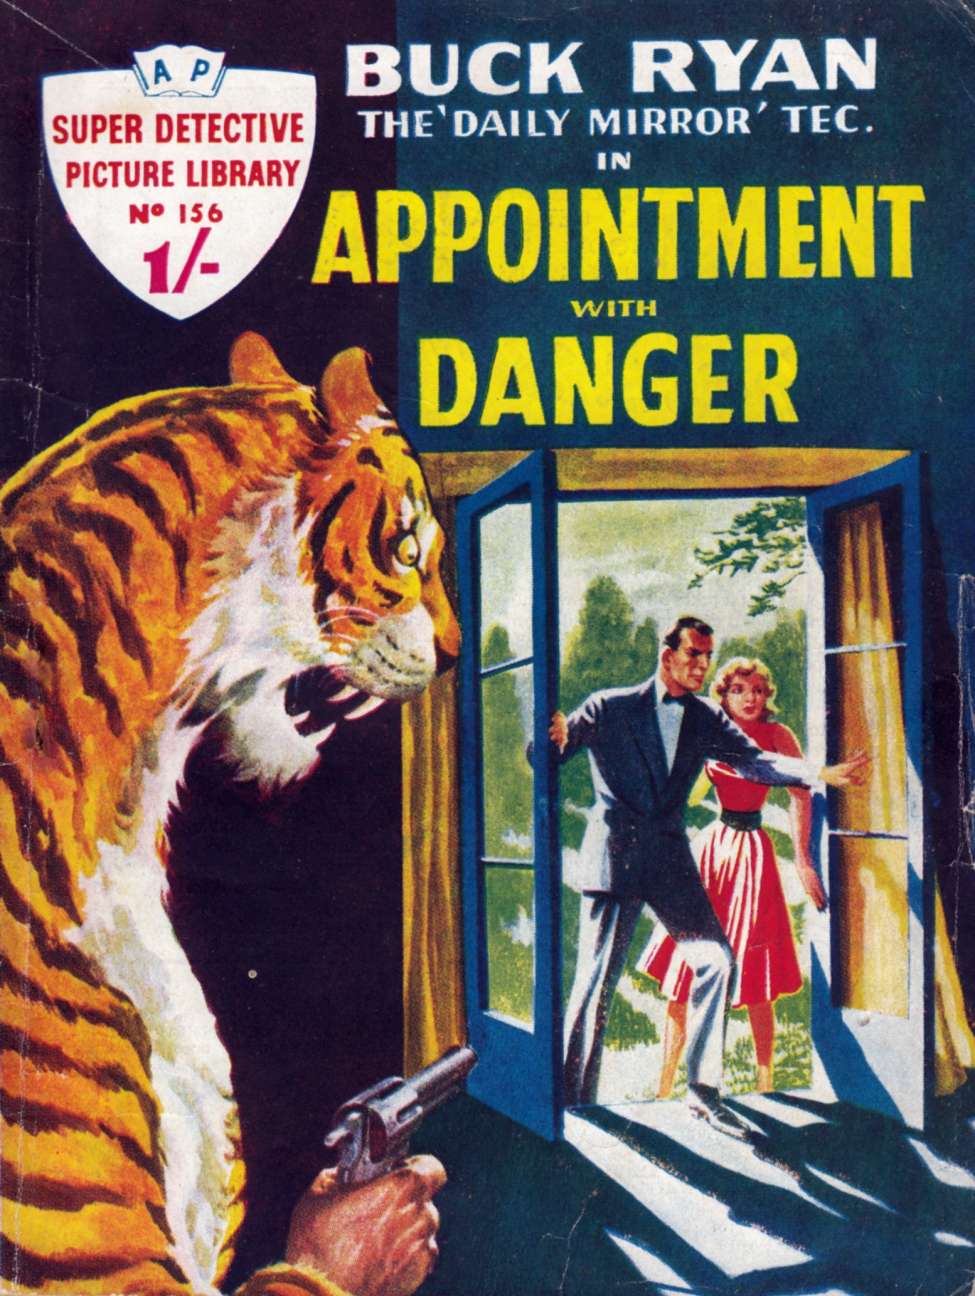 Comic Book Cover For Super Detective Library 156 - Buck Ryan - Appointment With Danger